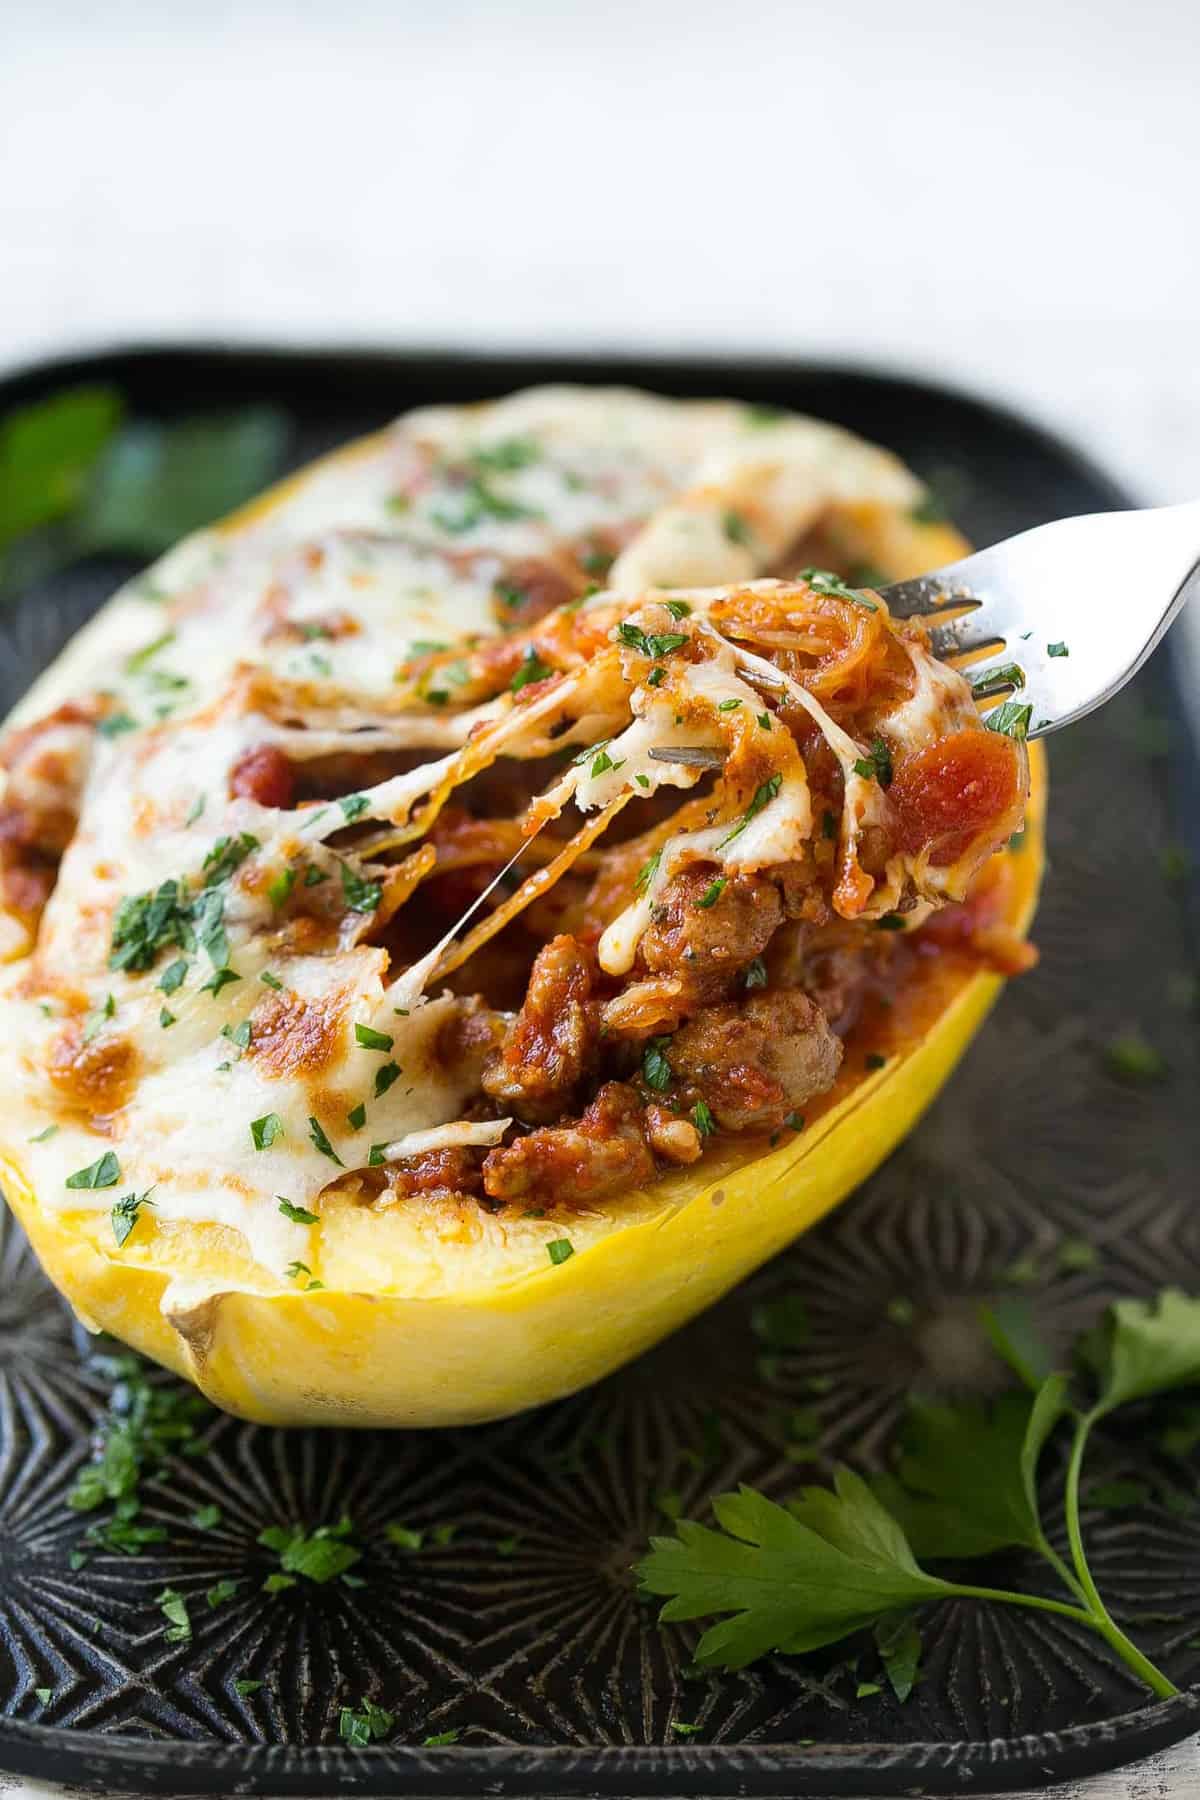 baked squash with fork grabbing bite, melted cheese